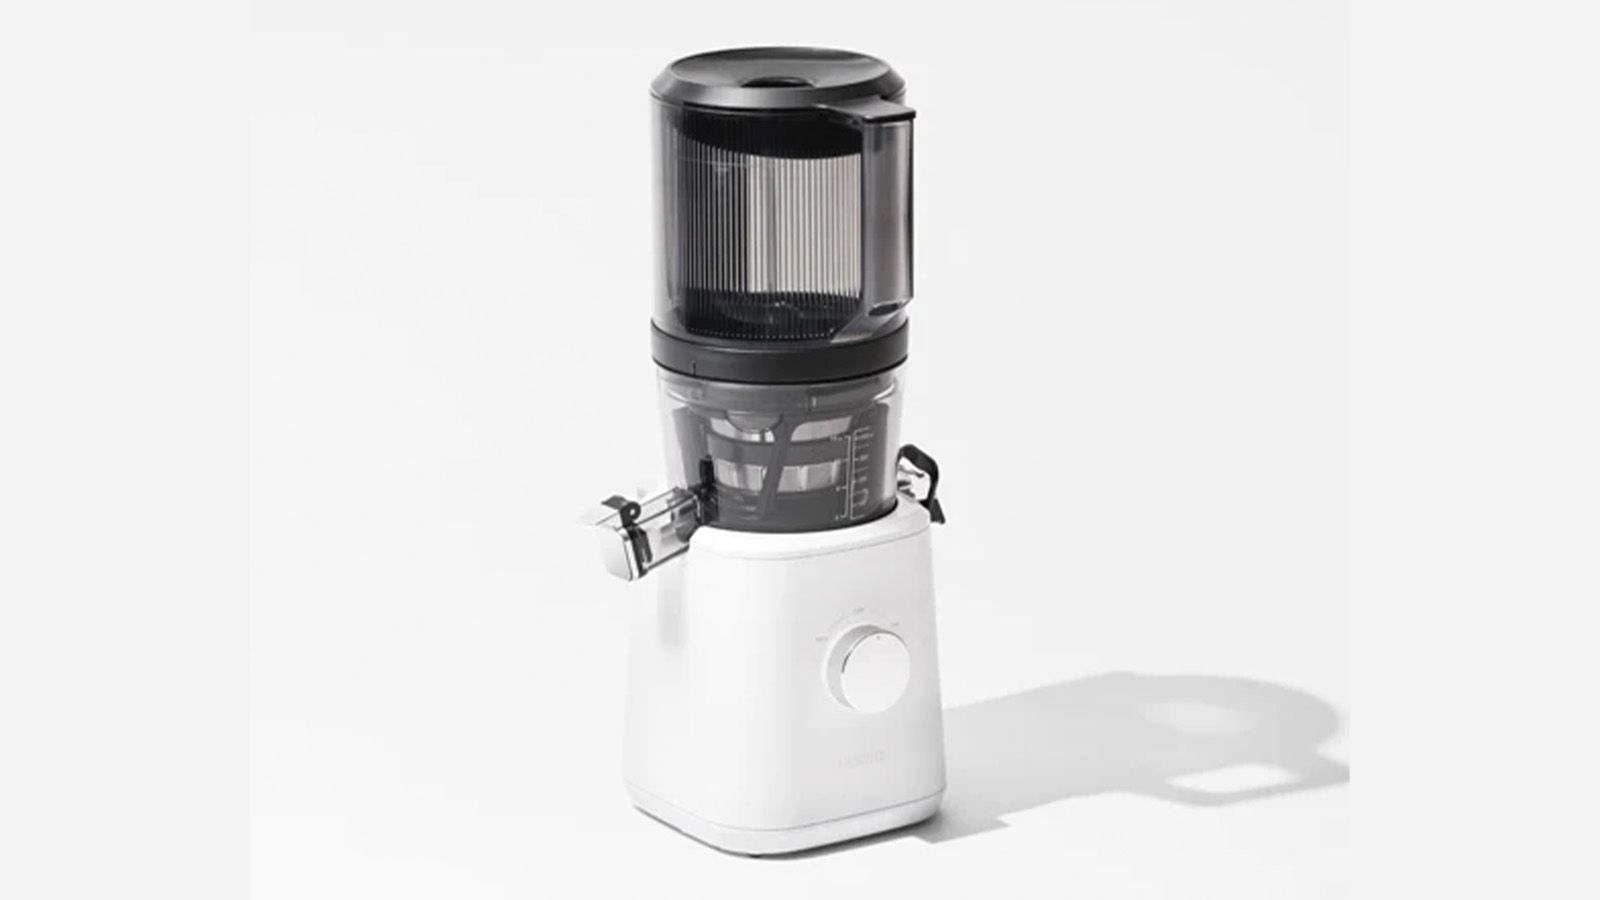 10 best juicers and blenders for families for 2022 UK